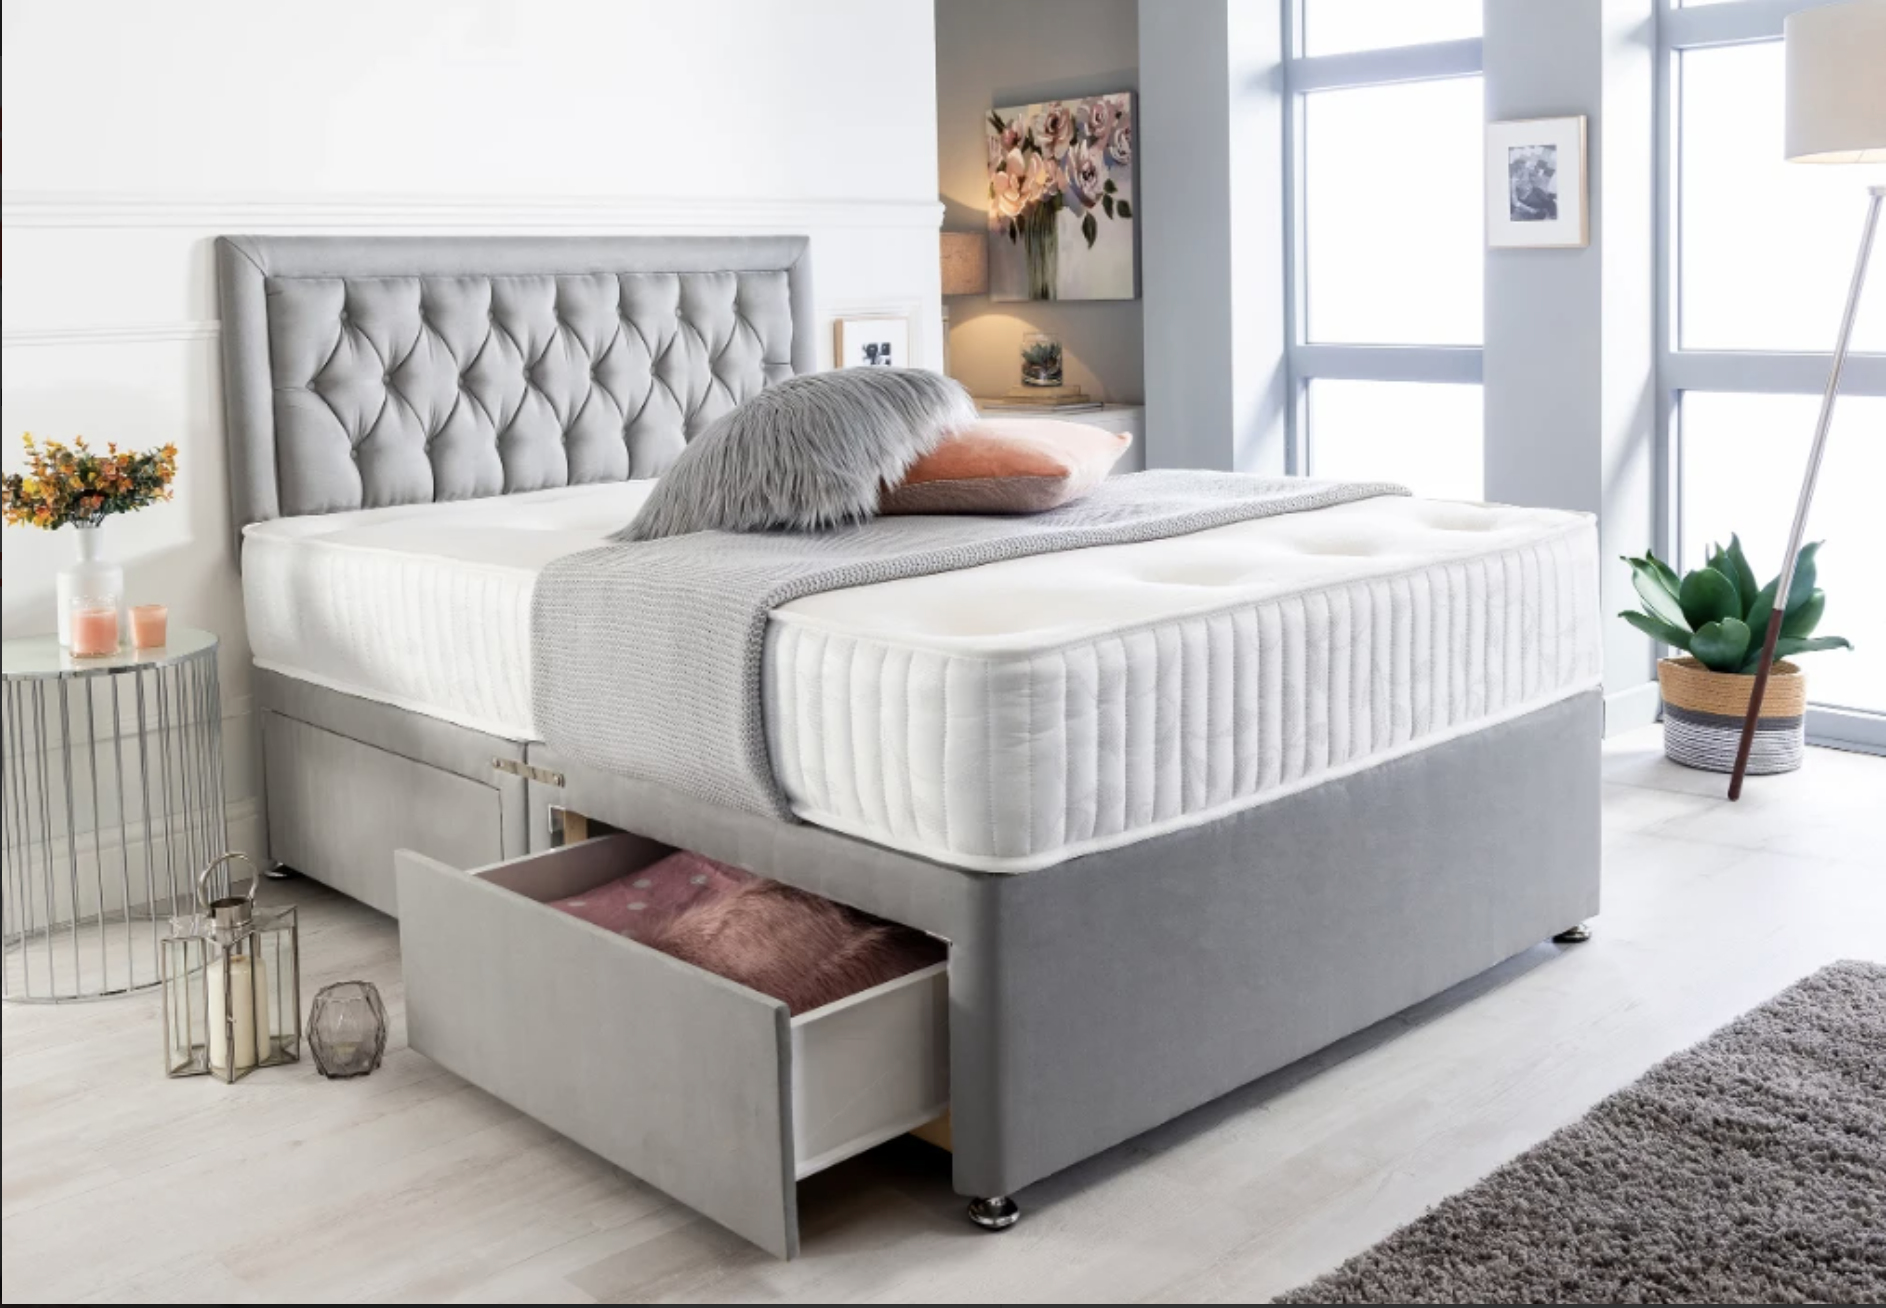 bed sets come with mattress